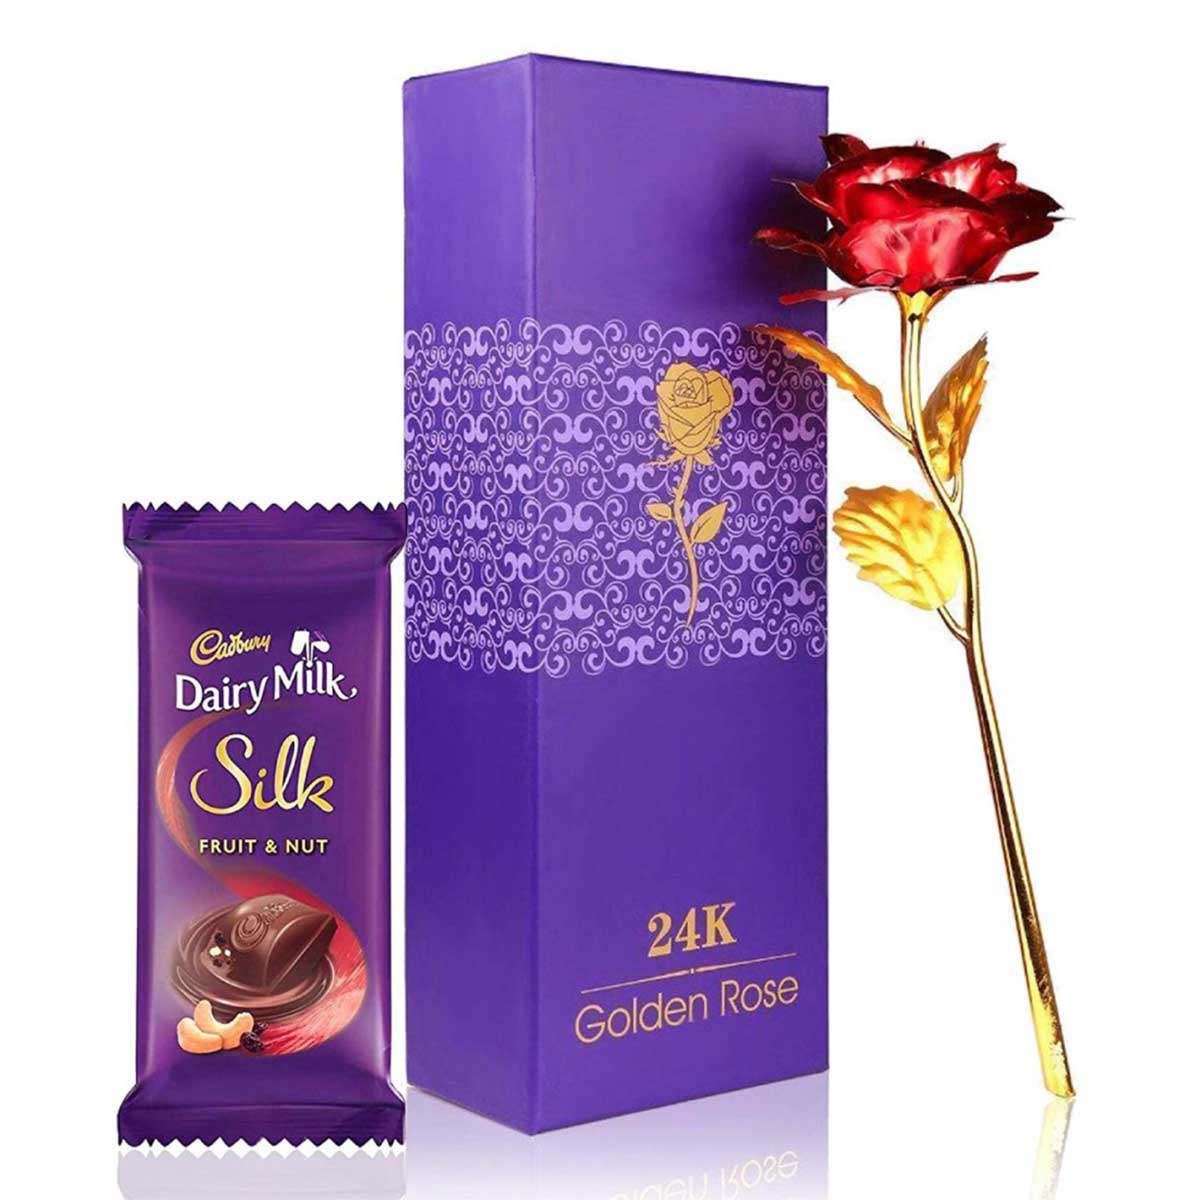 Latest Artificial Red Golden Rose& Dairy Milk Silk Fruit And Nut ...